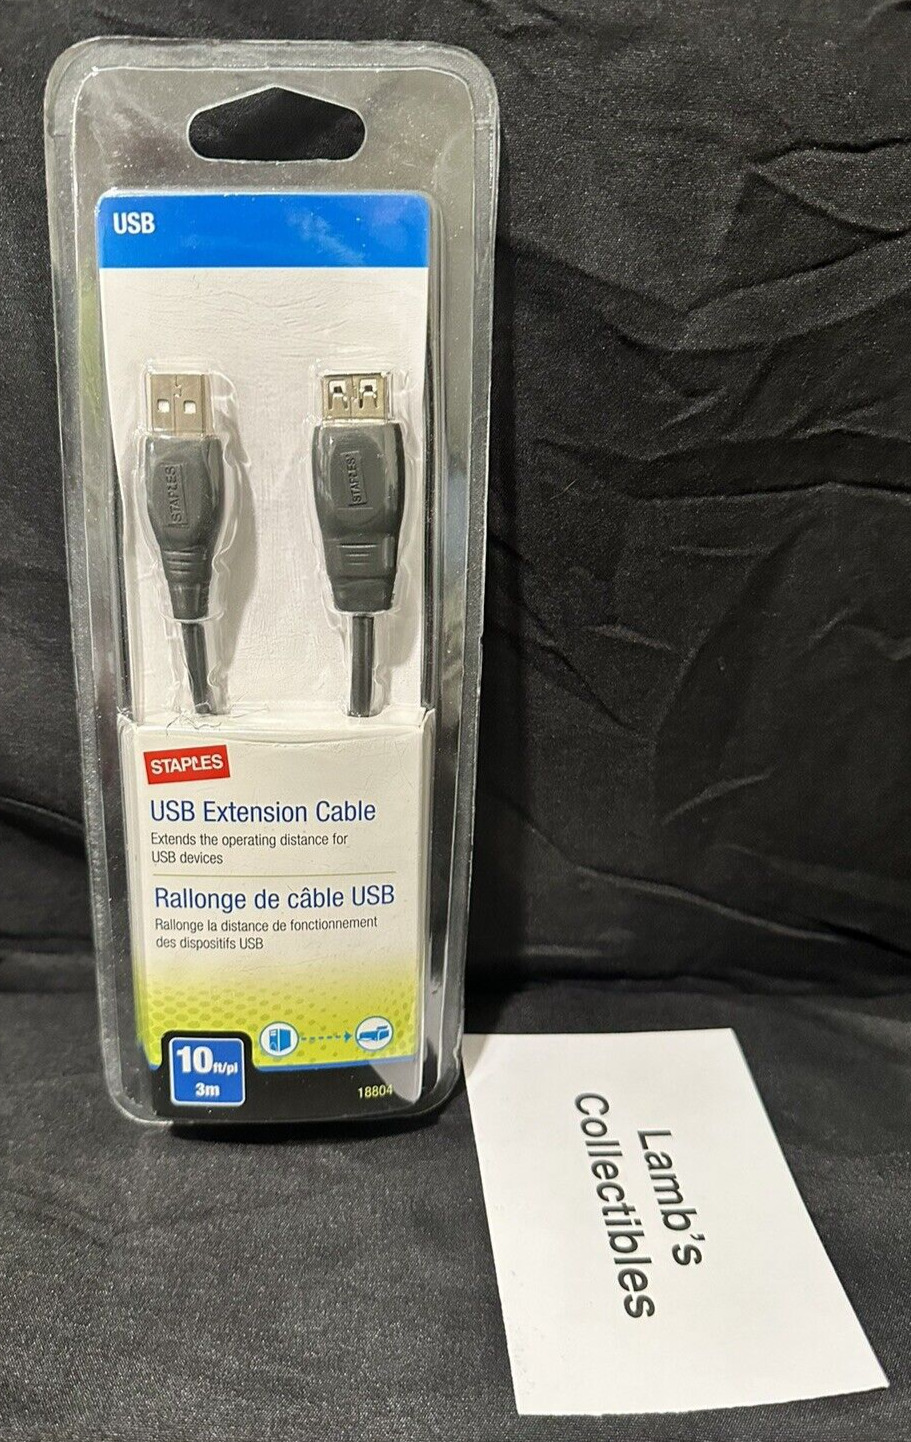 USB 10’ 10ft Foot Extension Cable Staples Good For Xbox Controllers data etc